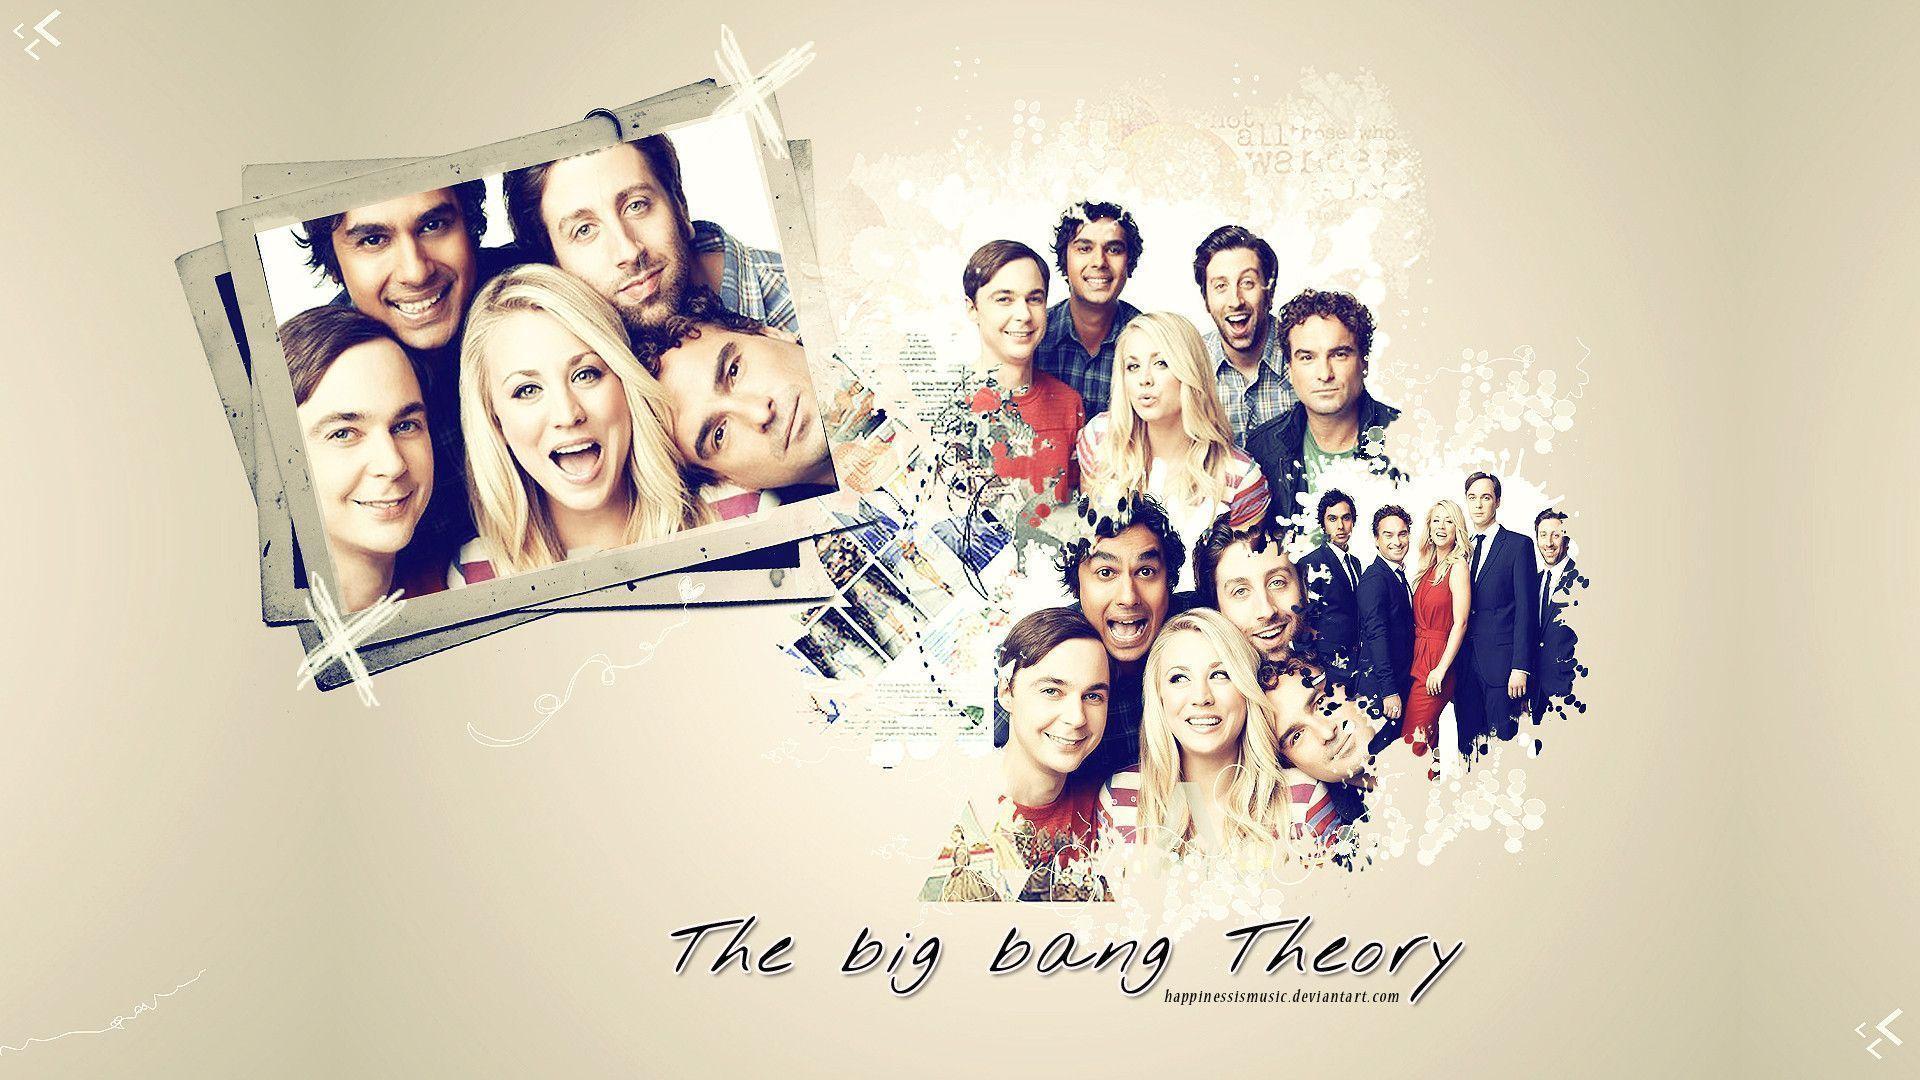 The big bang theory wallpapers by HappinessIsMusic